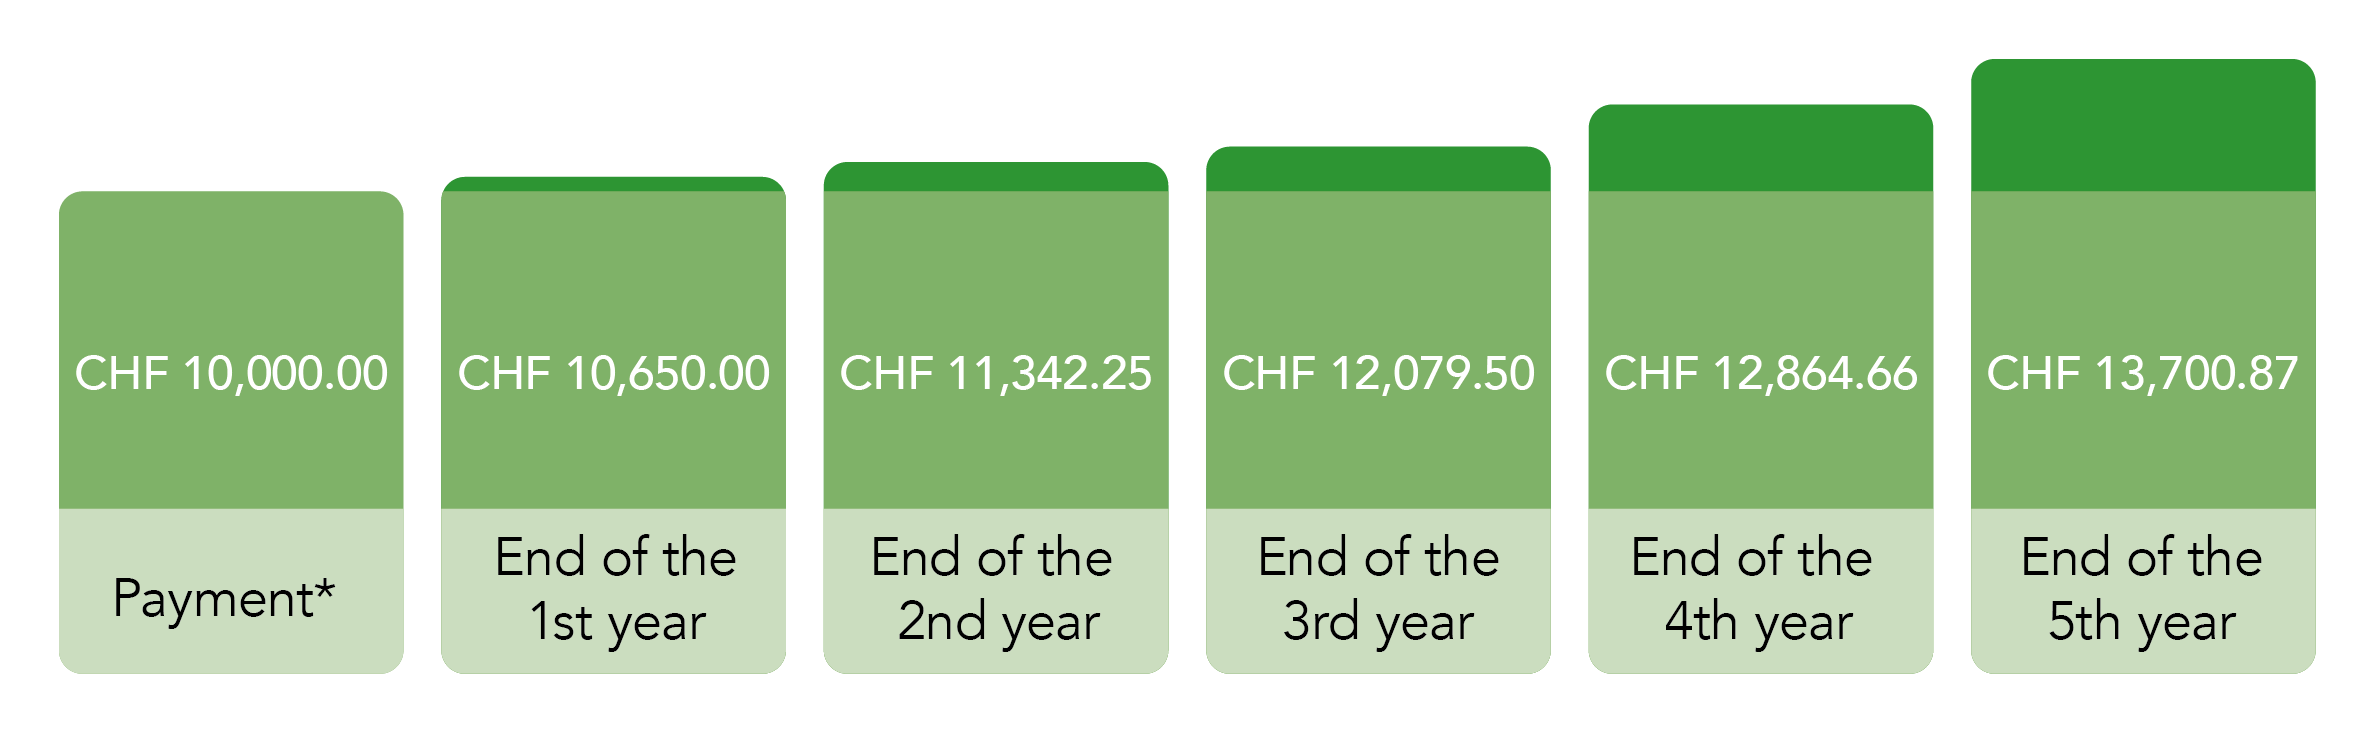 Diagram showing the interest in subsequent years after a one-off payment - more information can be found in the description of the image.